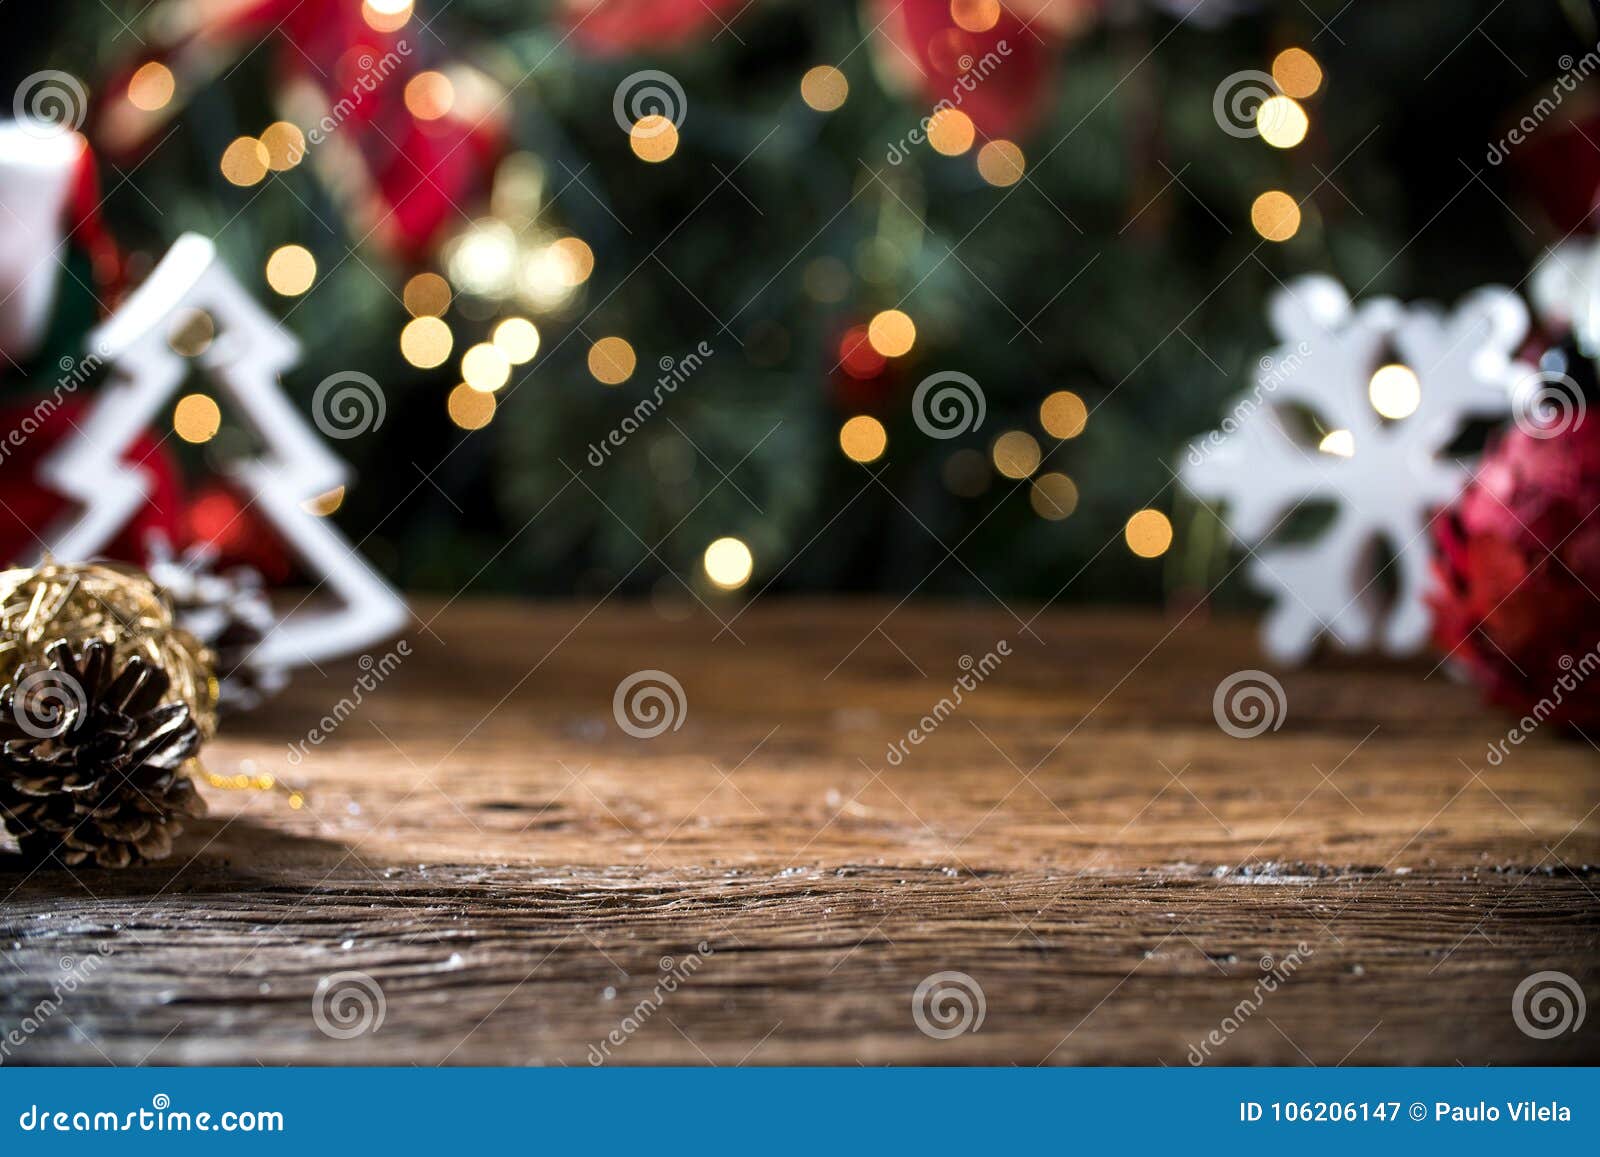 Download Christmas Table Blurred Lights Background Wood Desk In Focus Xmas Wooden Plank